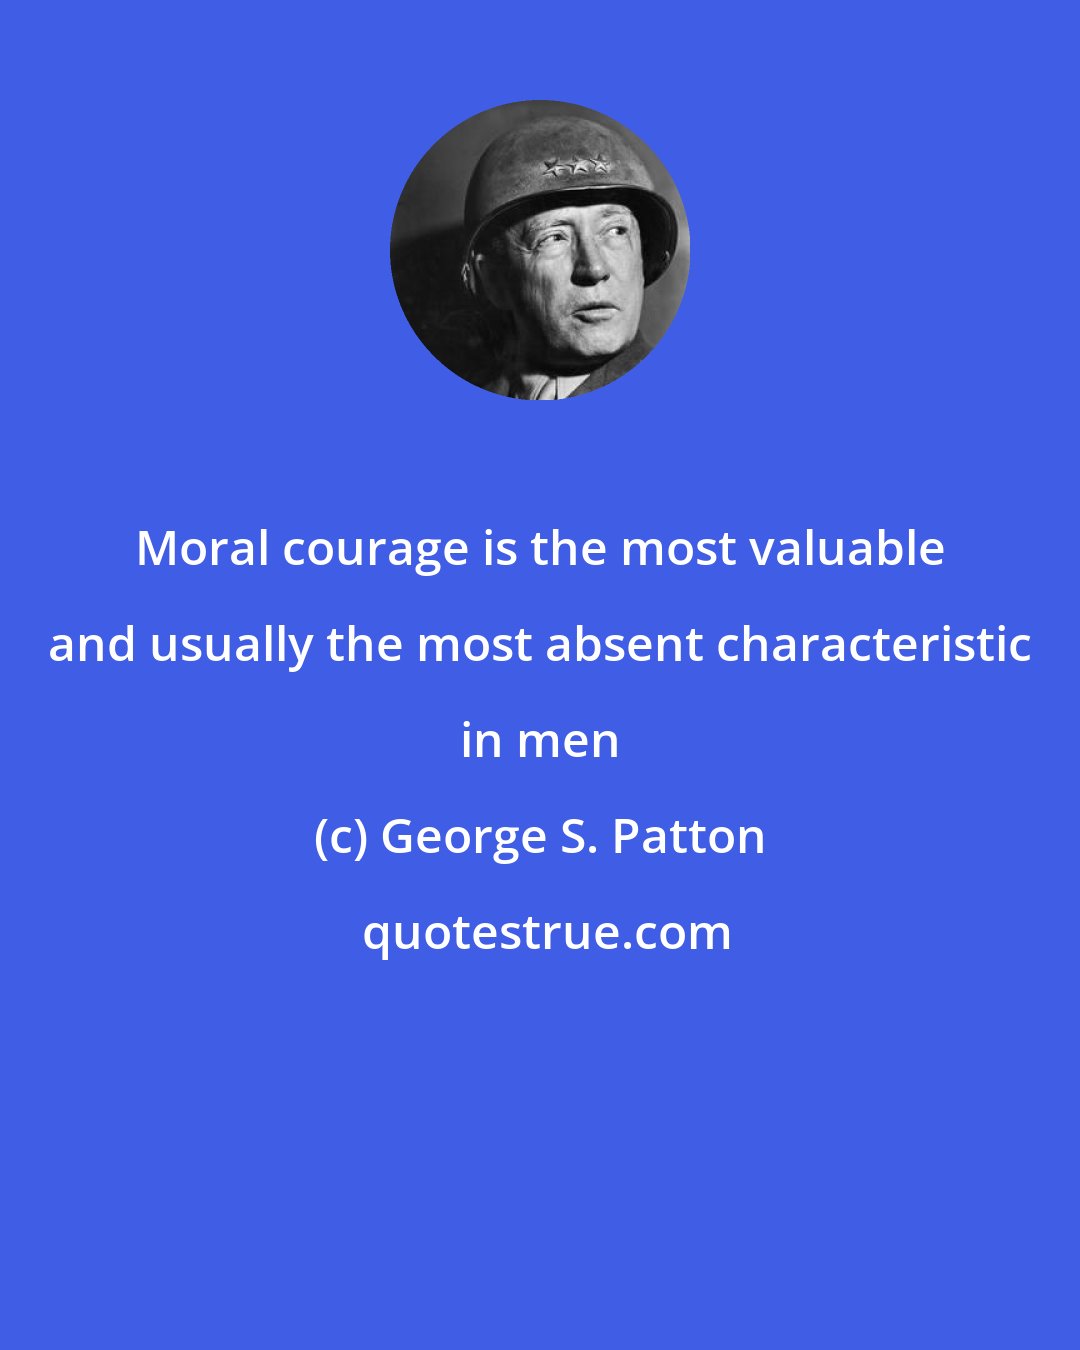 George S. Patton: Moral courage is the most valuable and usually the most absent characteristic in men